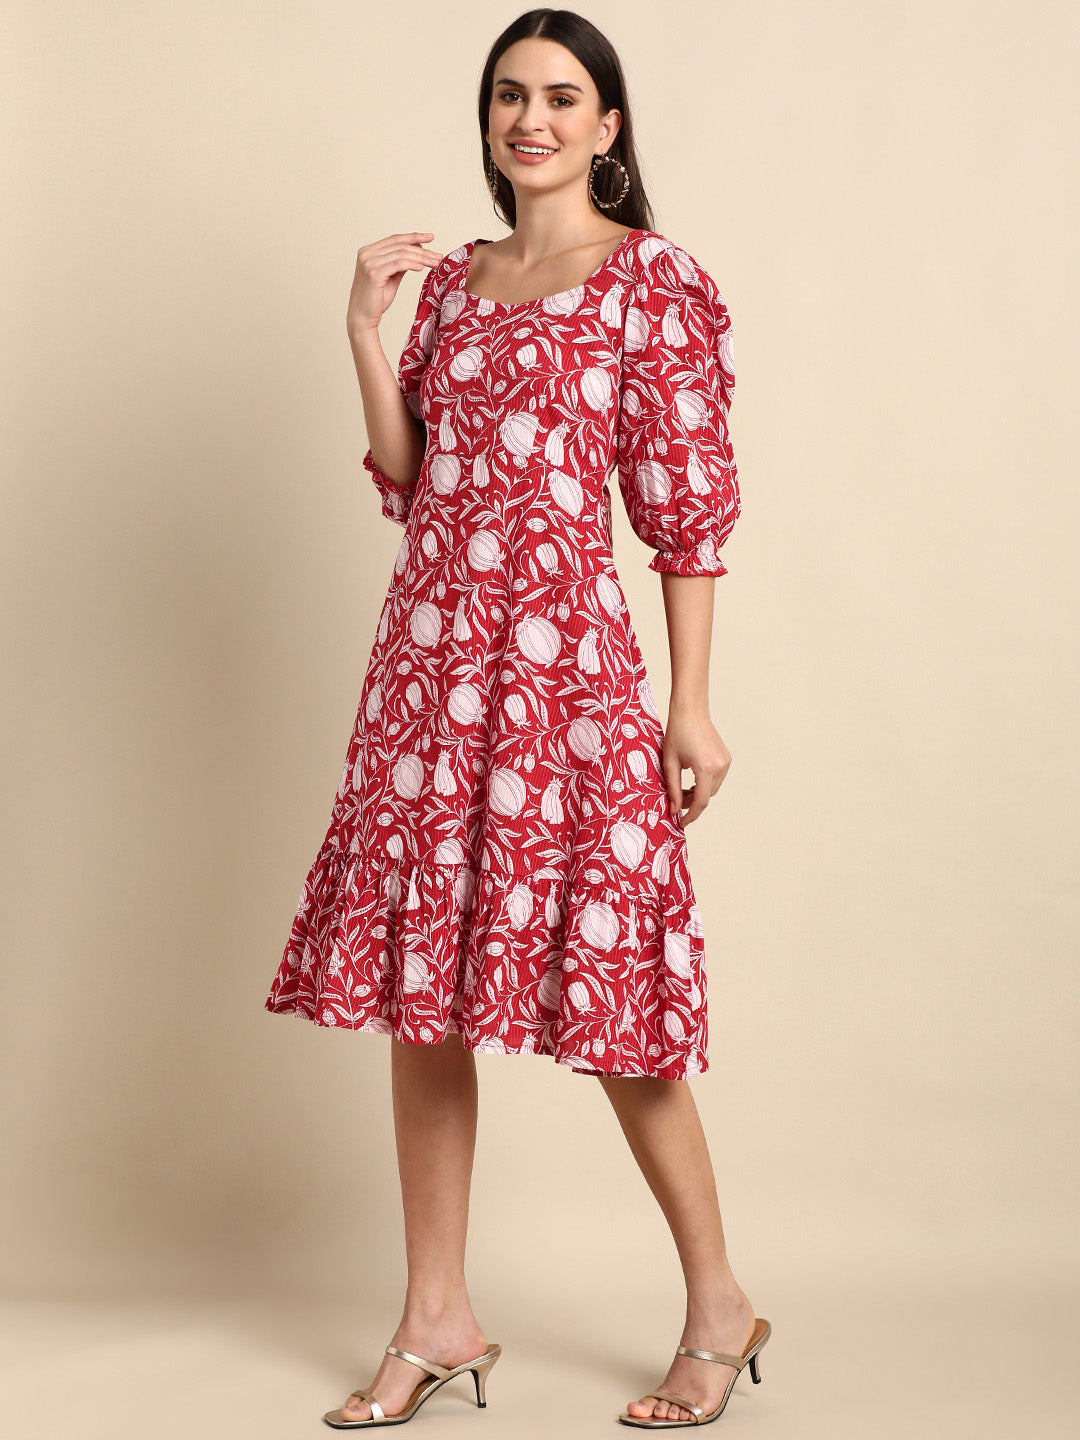 Buy Western Dresses For Girls Online at Mumkins – Page 2